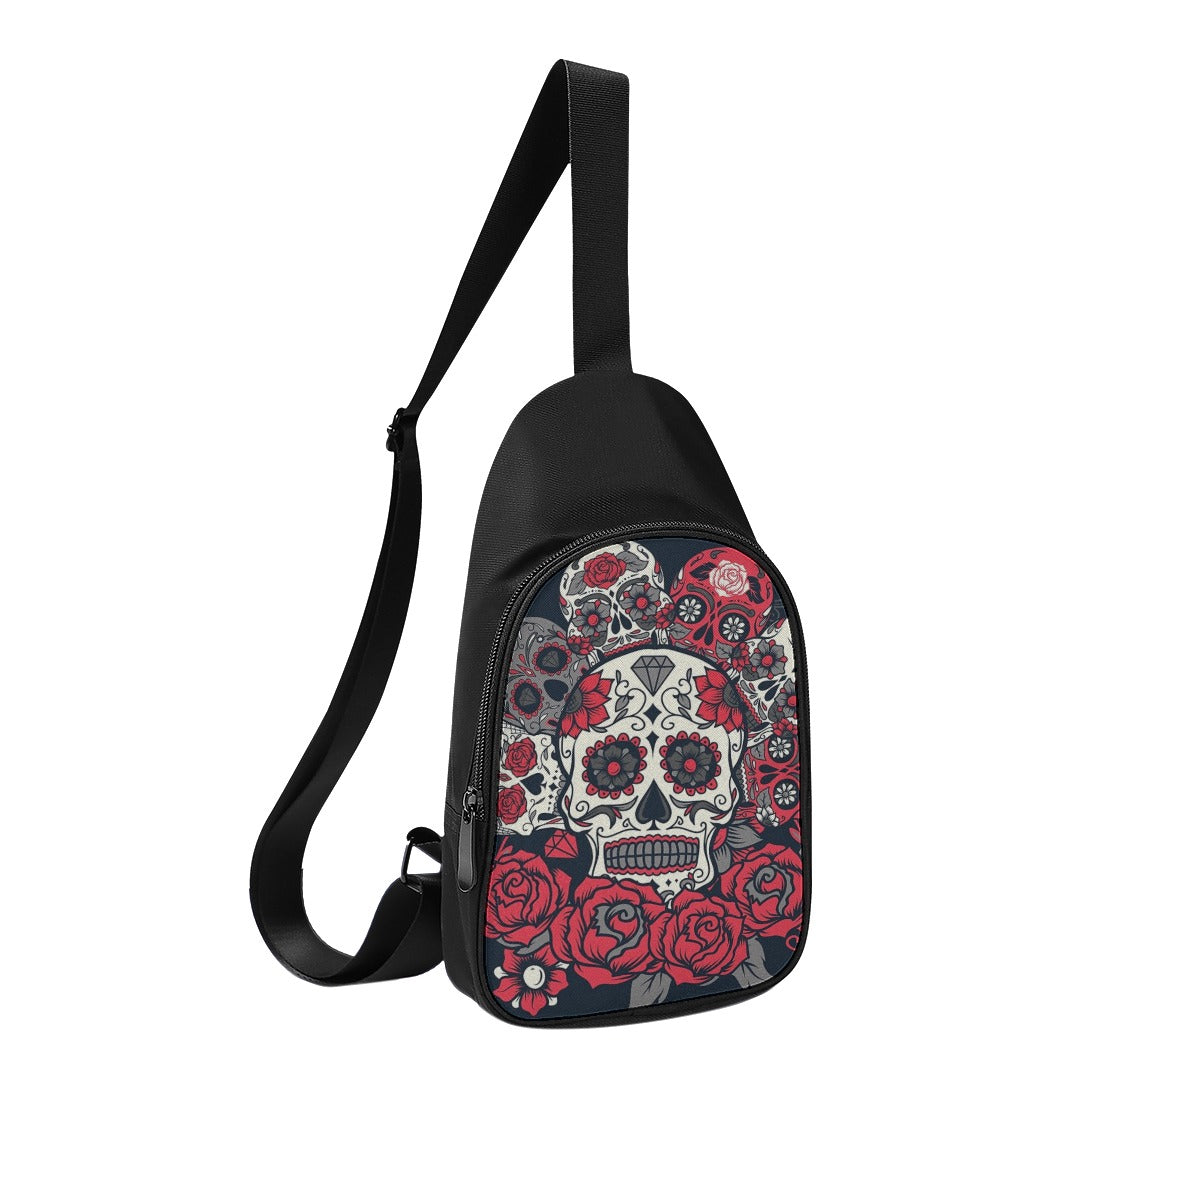 Sugar skull Chest Bags, Day of the dead Halloween skeleton gothic chest bag purse wallet